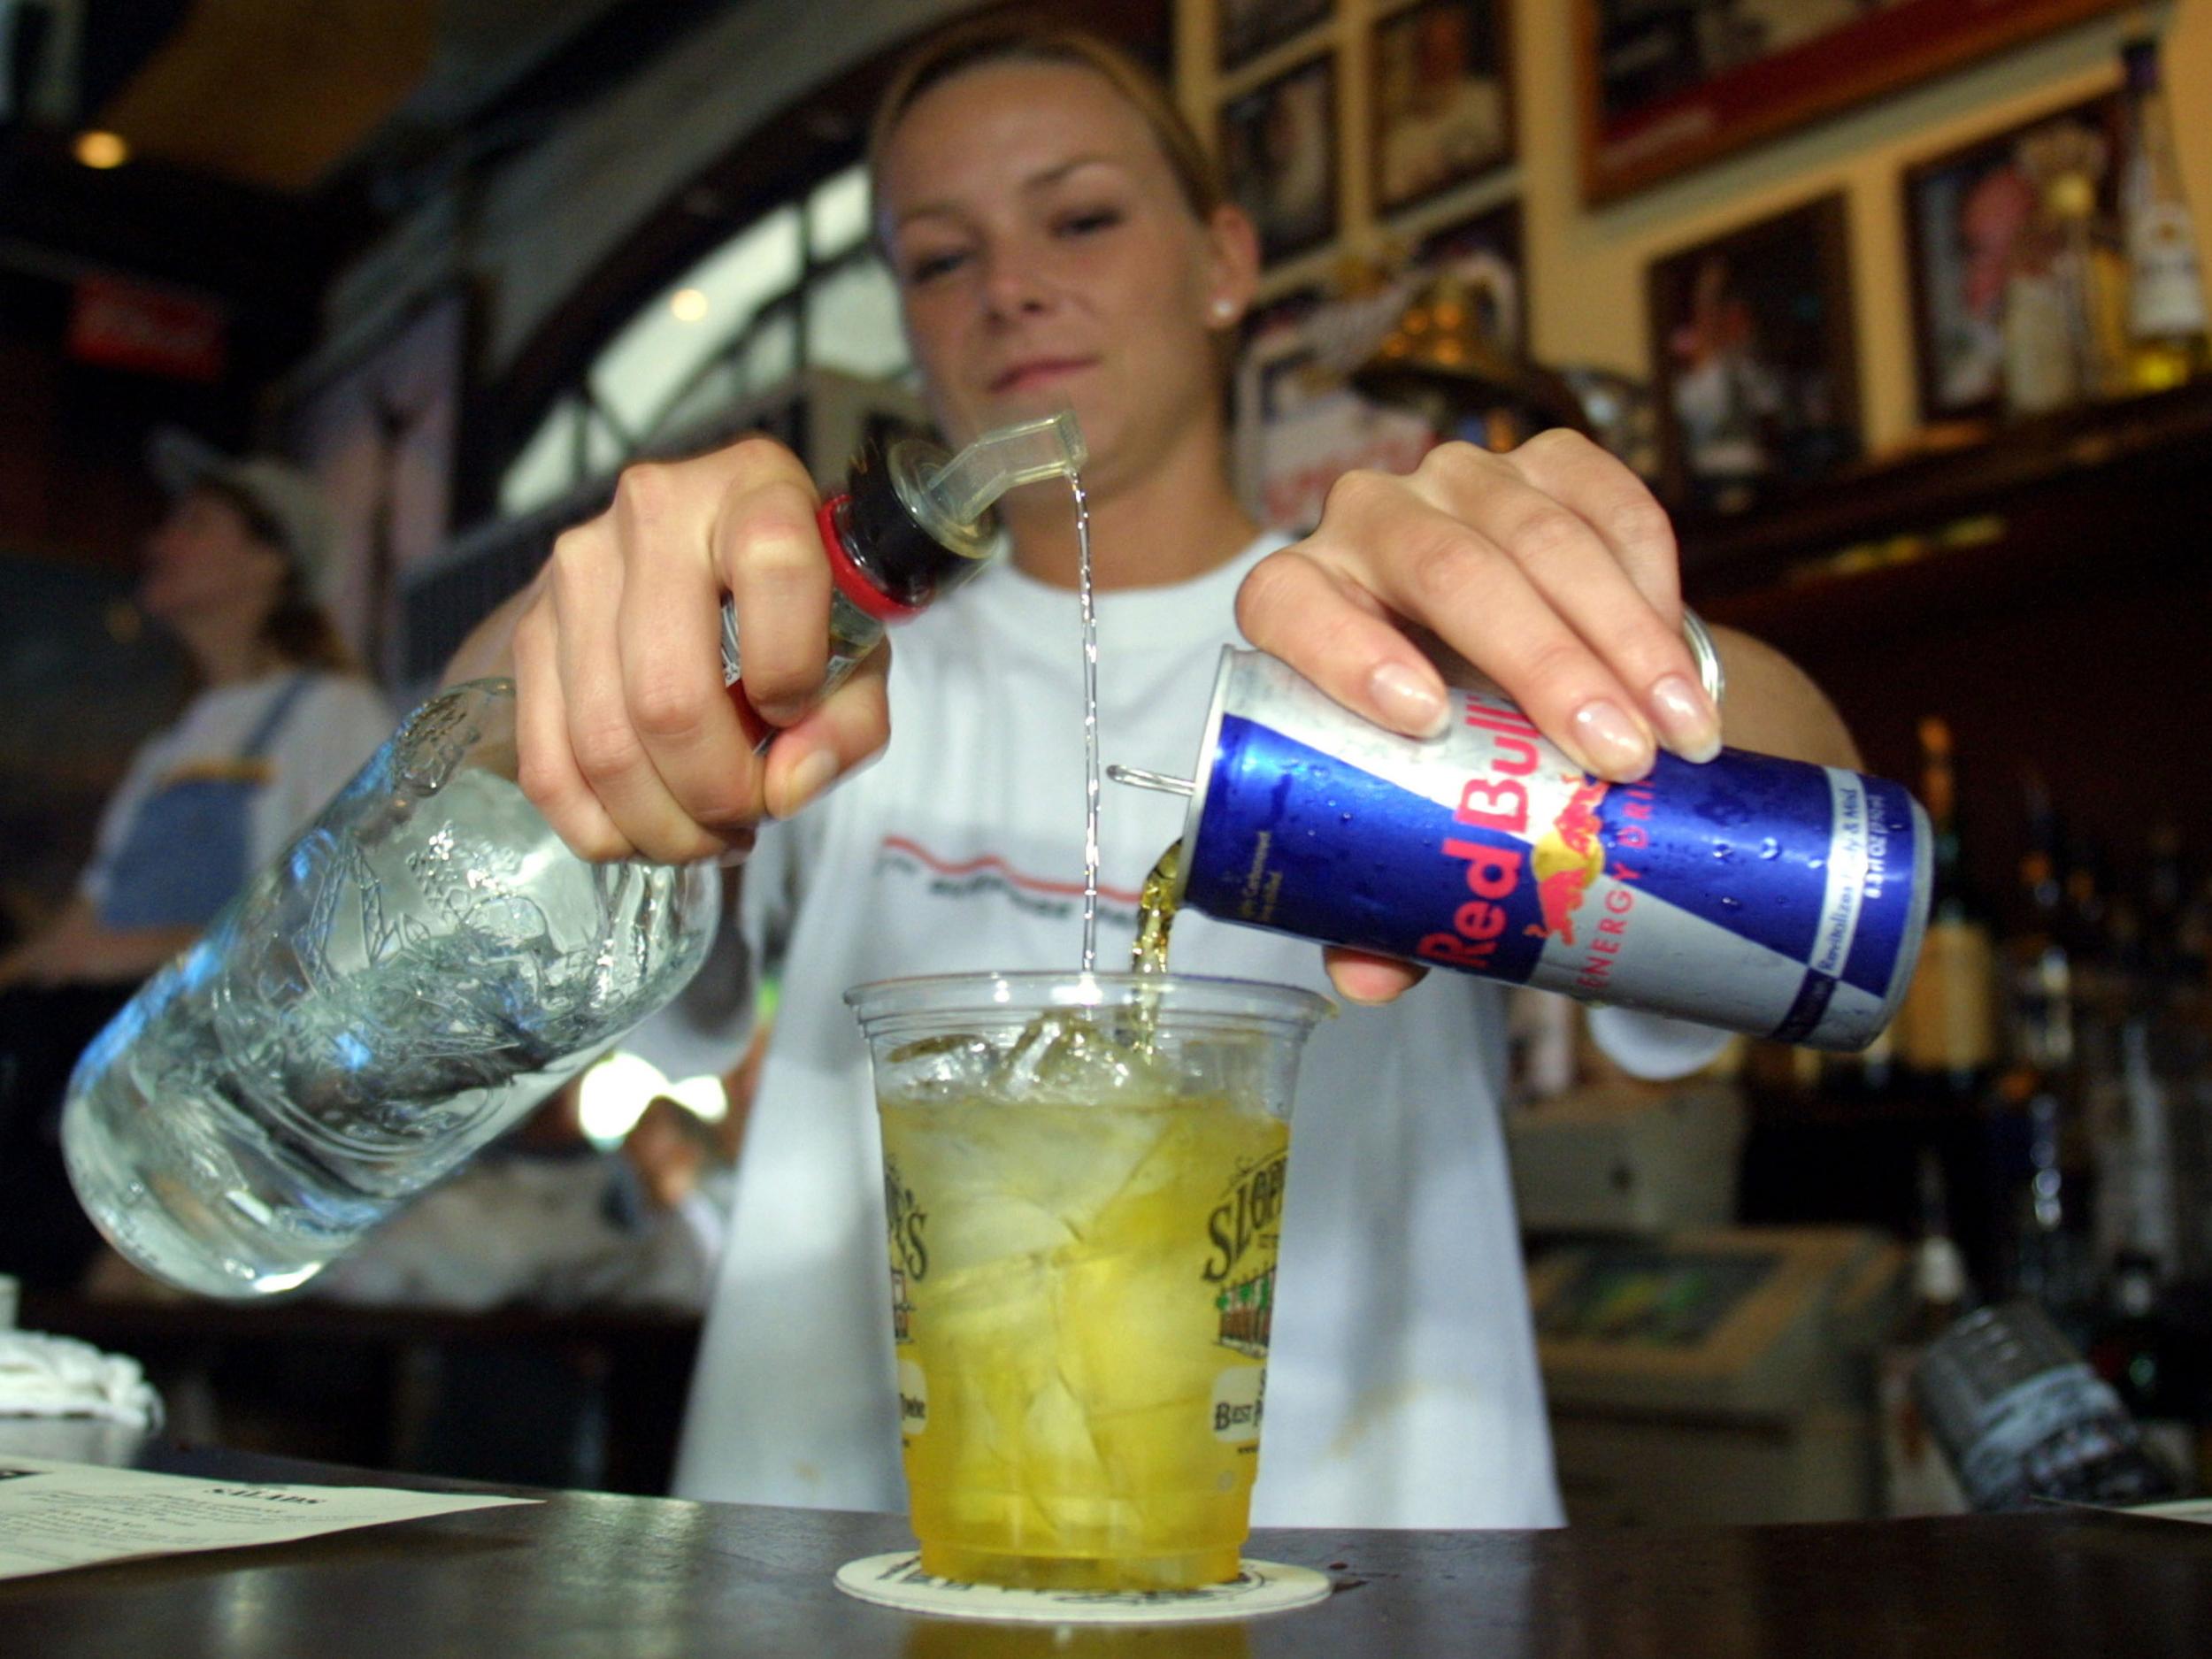 Mixing alcohol with energy drinks could heighten the risk of injury